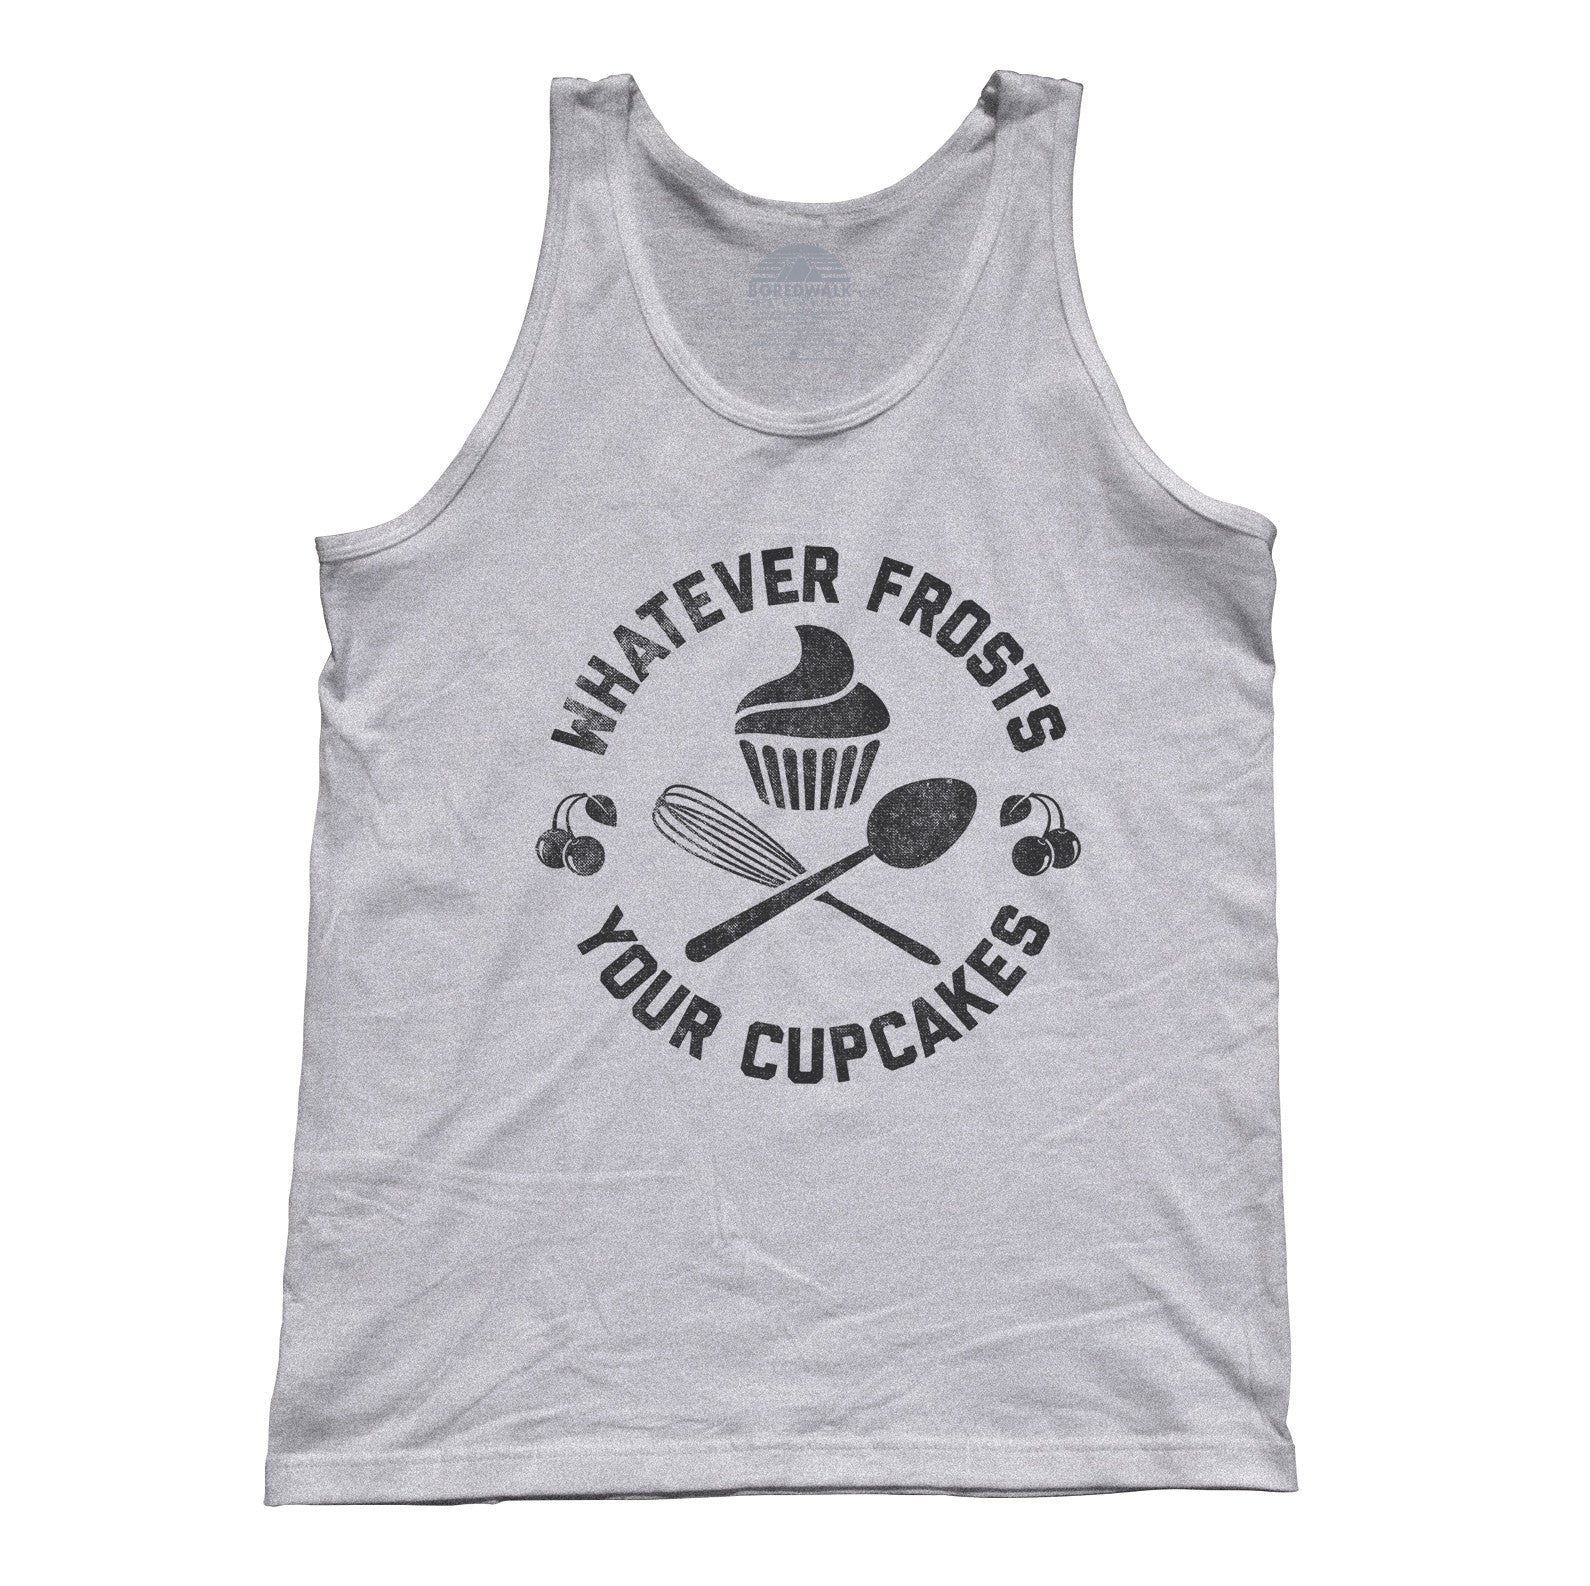 Unisex Whatever Frosts Your Cupcakes Tank Top